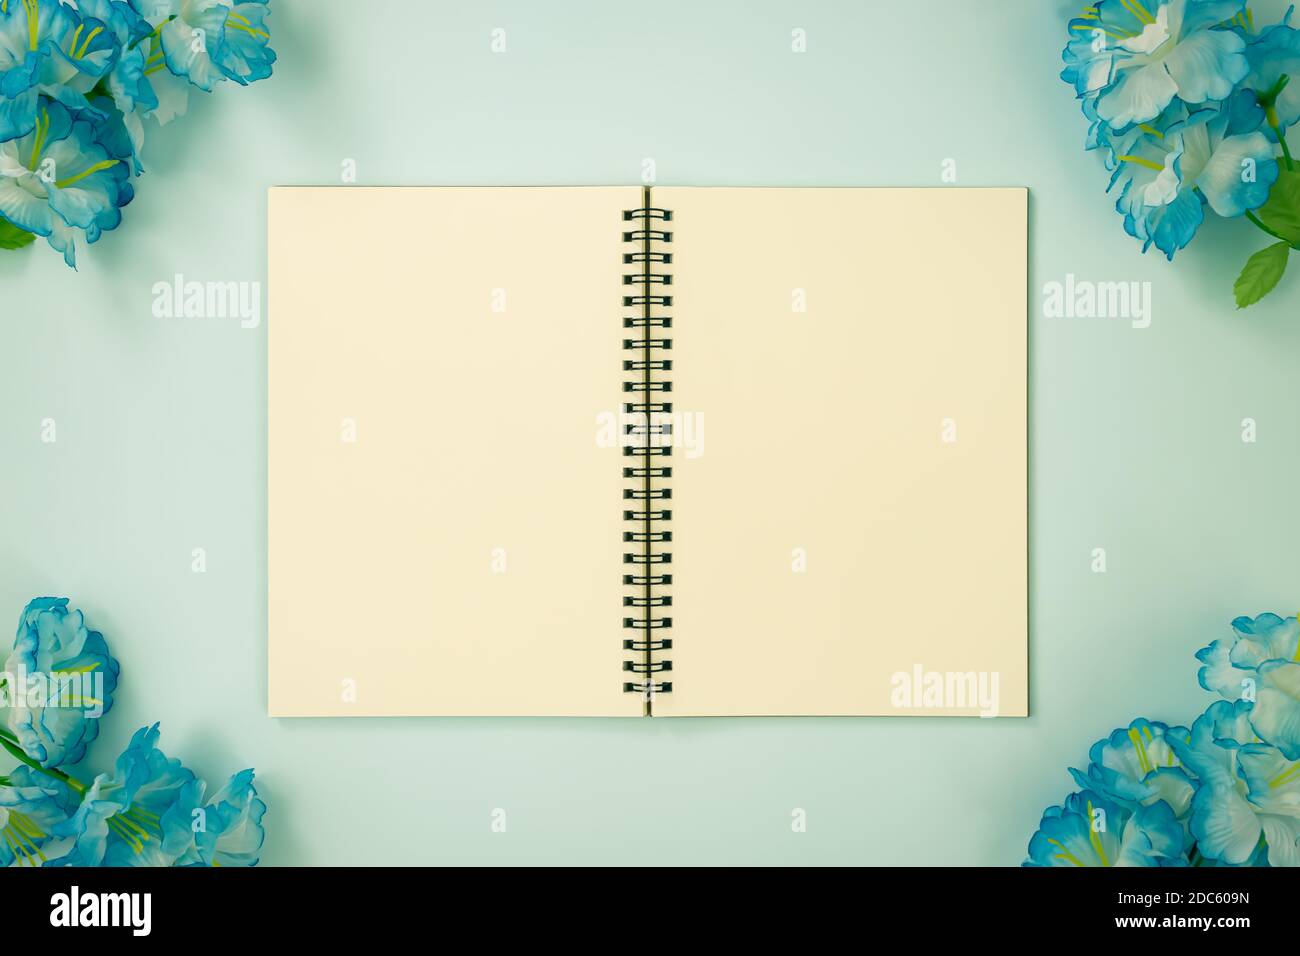 Top Table Spiral Notebook or Spring Notebook Mockup in Unlined Type on Center Frame and Blue Flowers at Corner on Blue Pastel Minimalist Background in Stock Photo